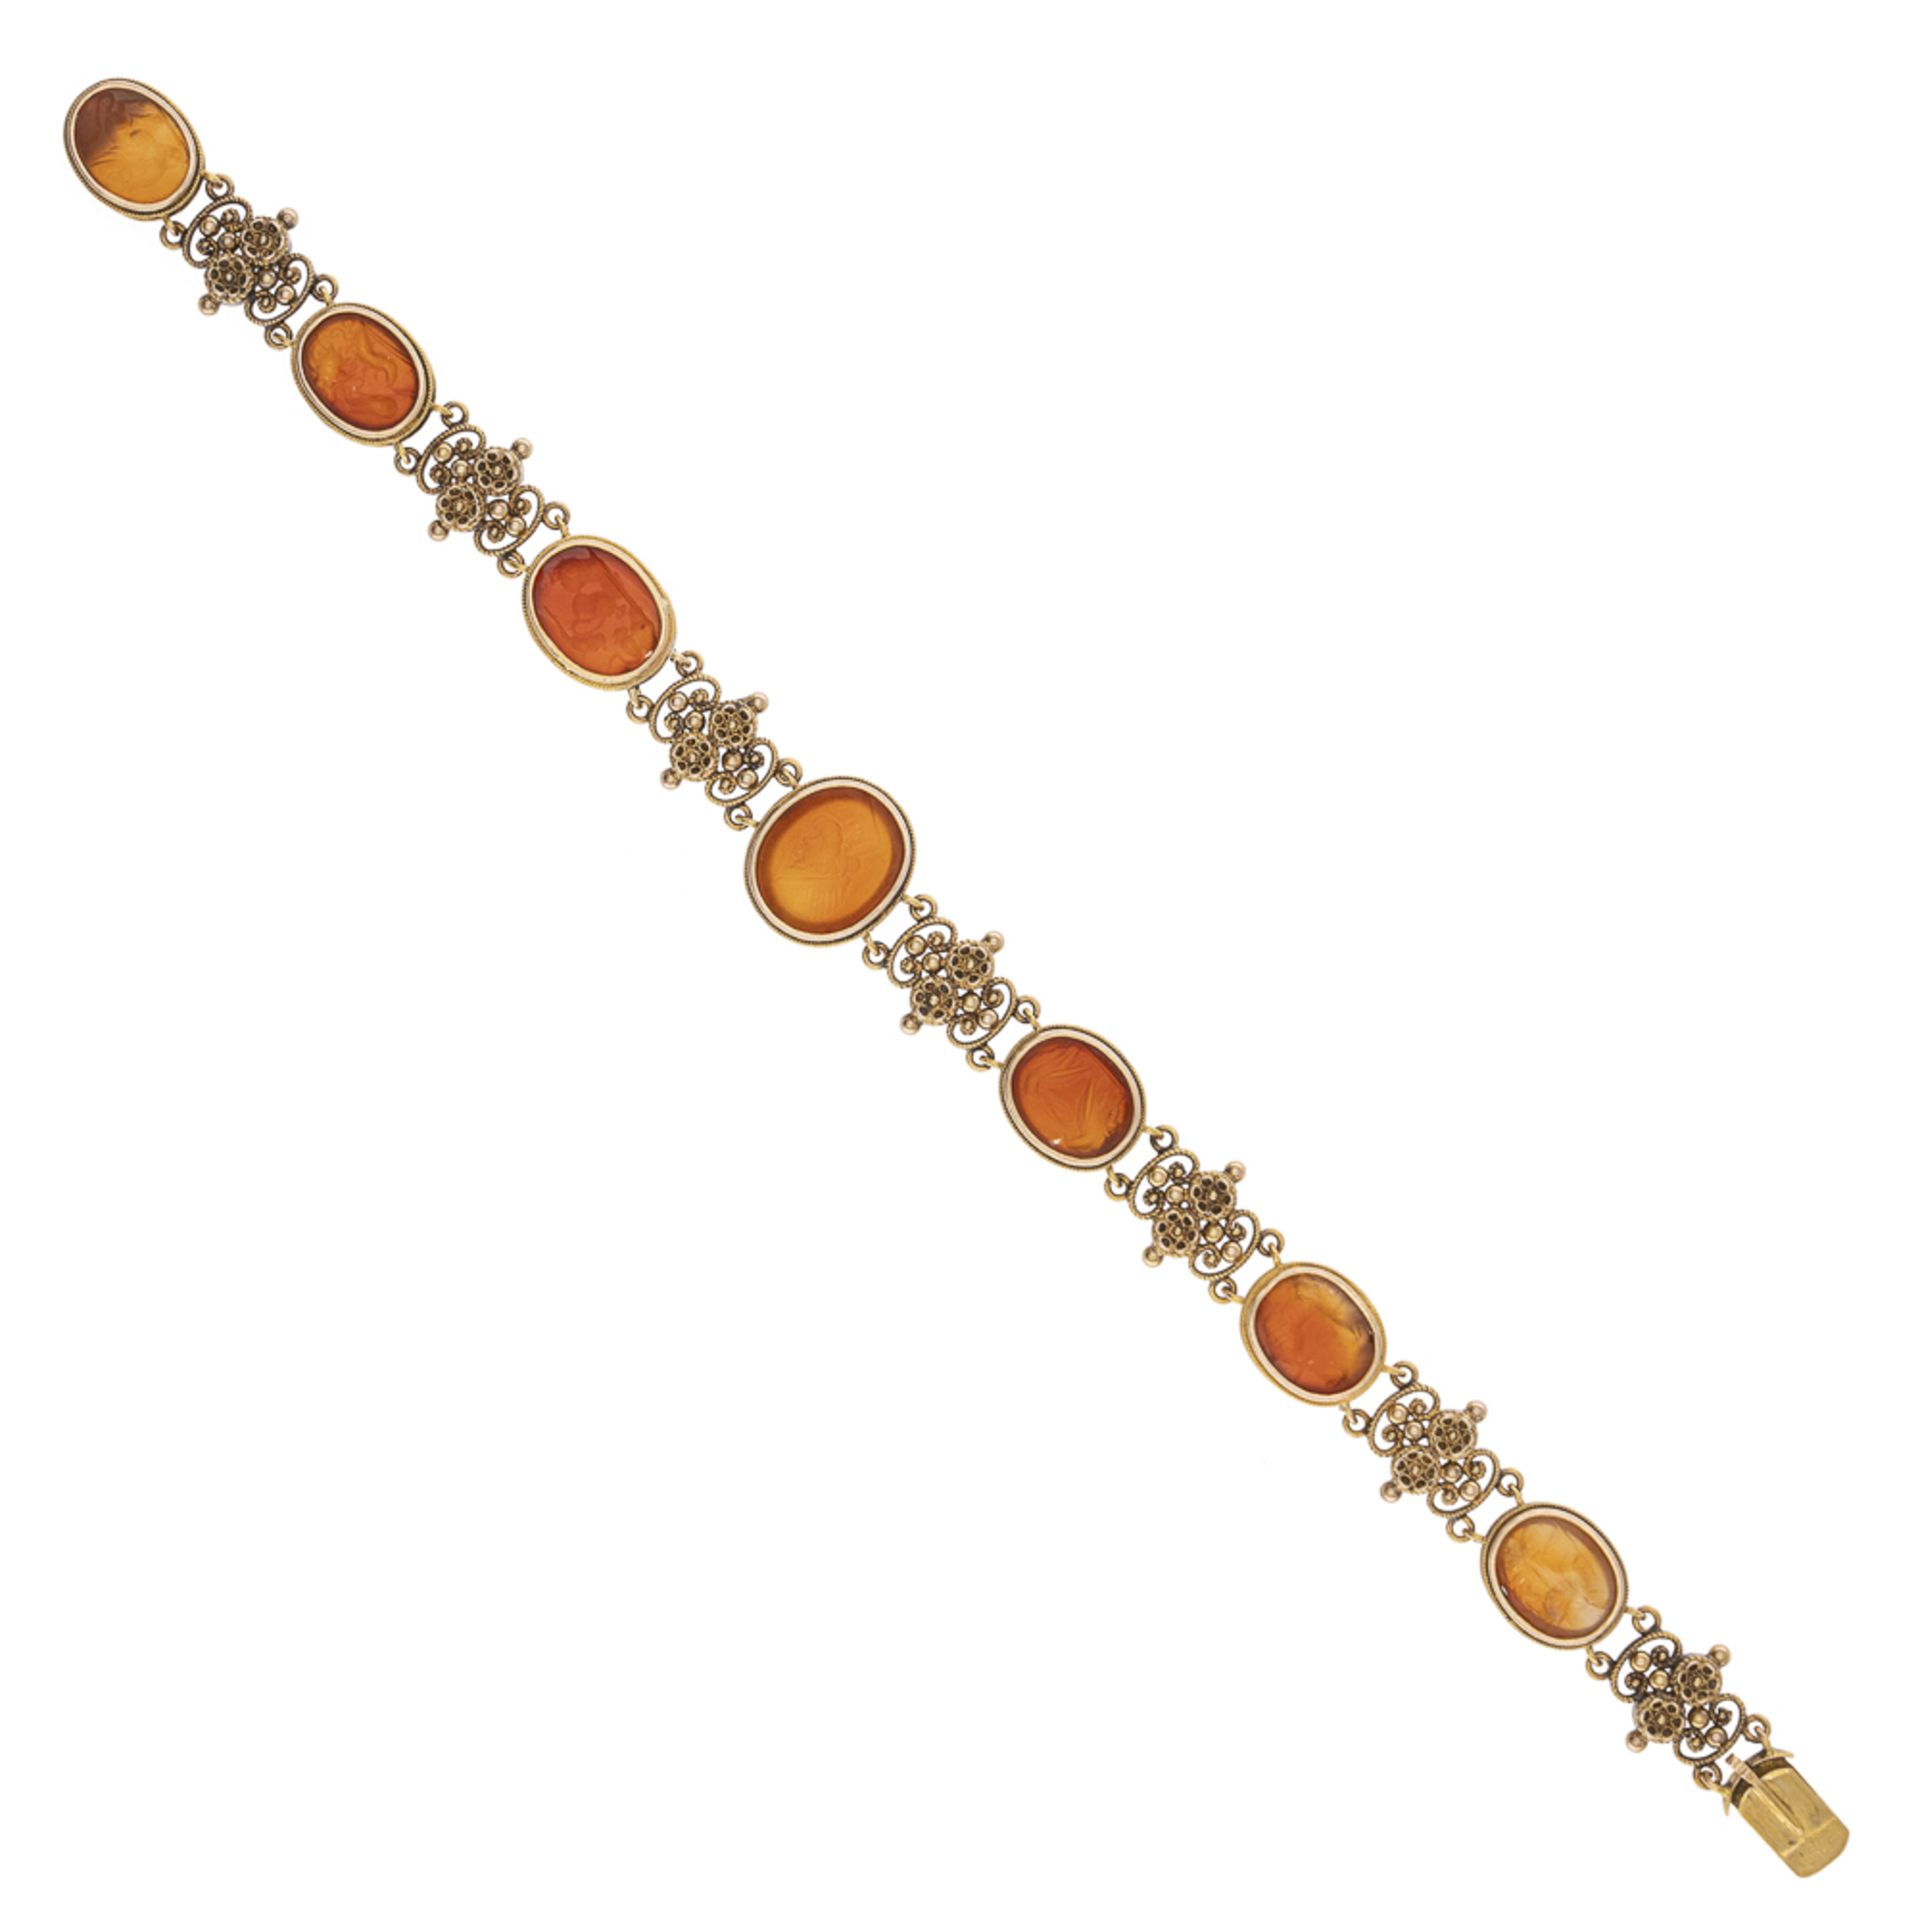 Antique 12 kt yellow gold bracelet with seven engraved carnelian plaques